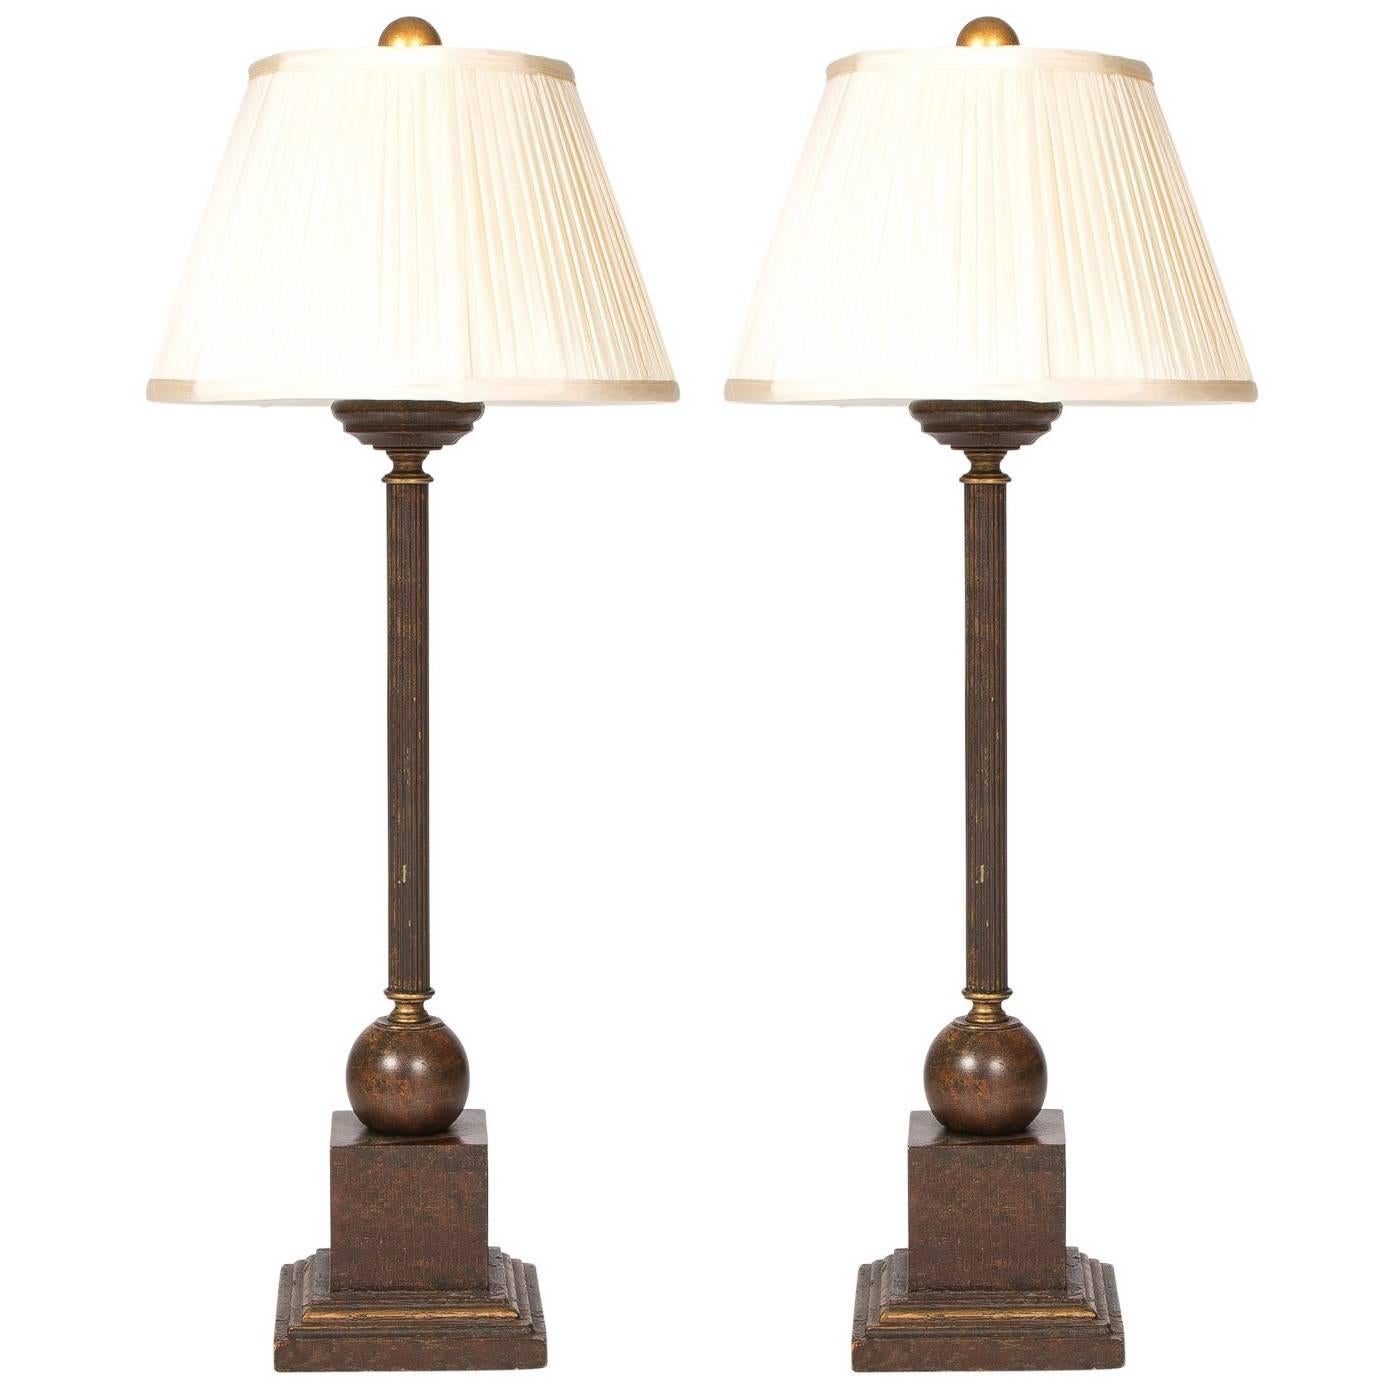 Pair of Vintage Candlestick Lamps